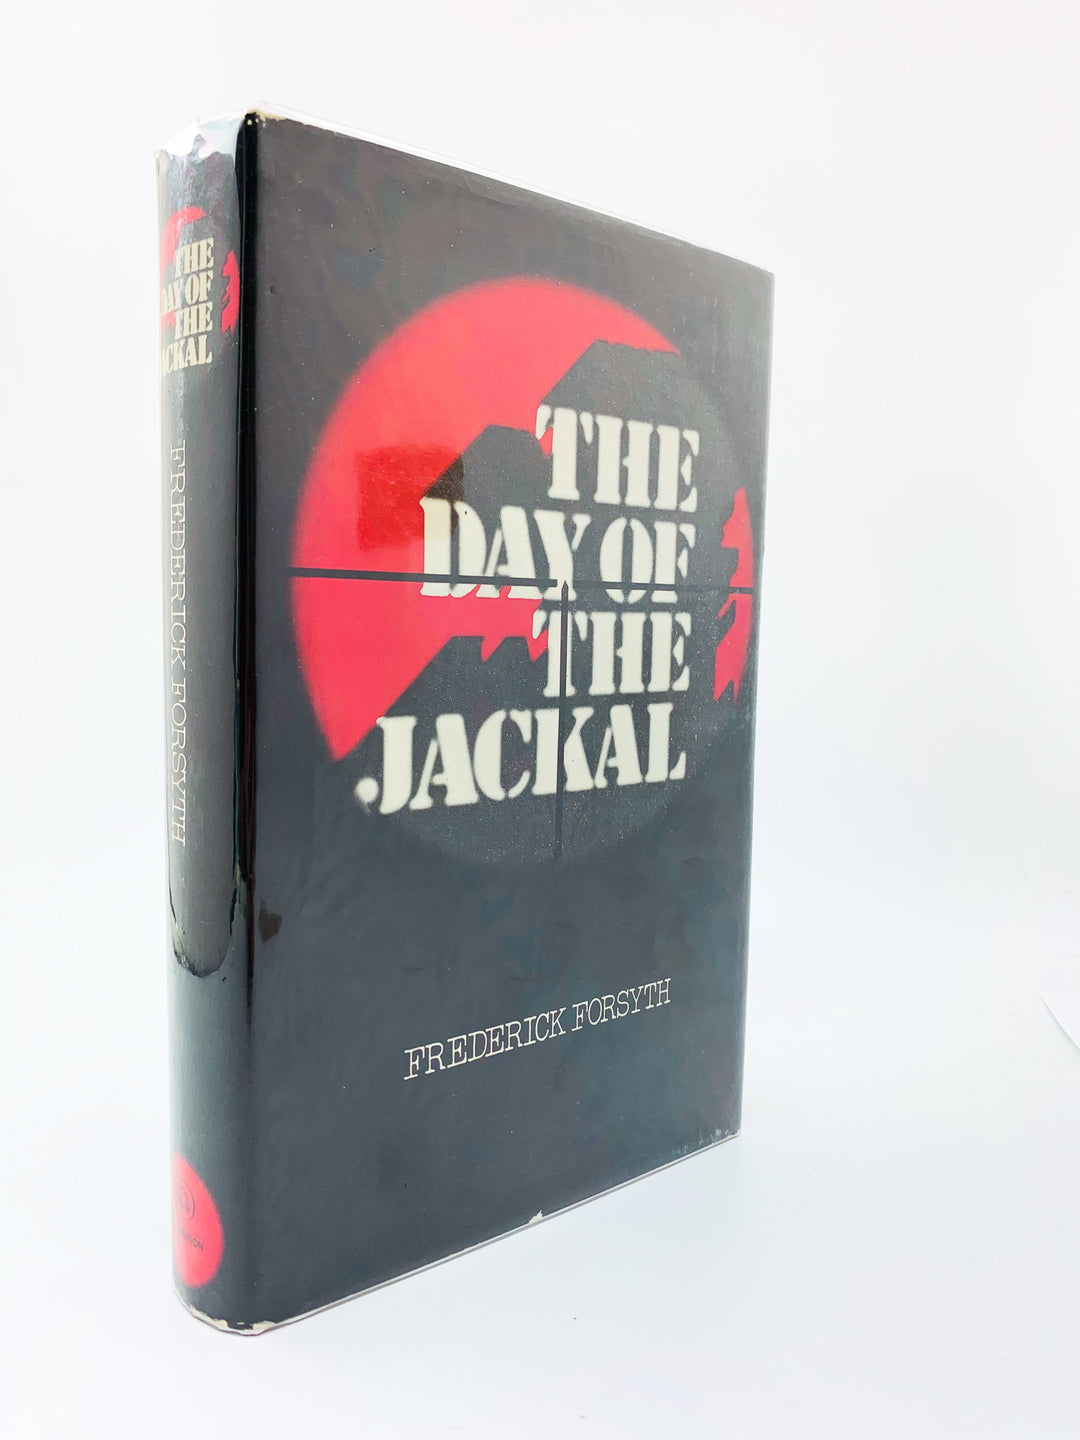 Forsyth, Frederick - The Day of the Jackal | front cover